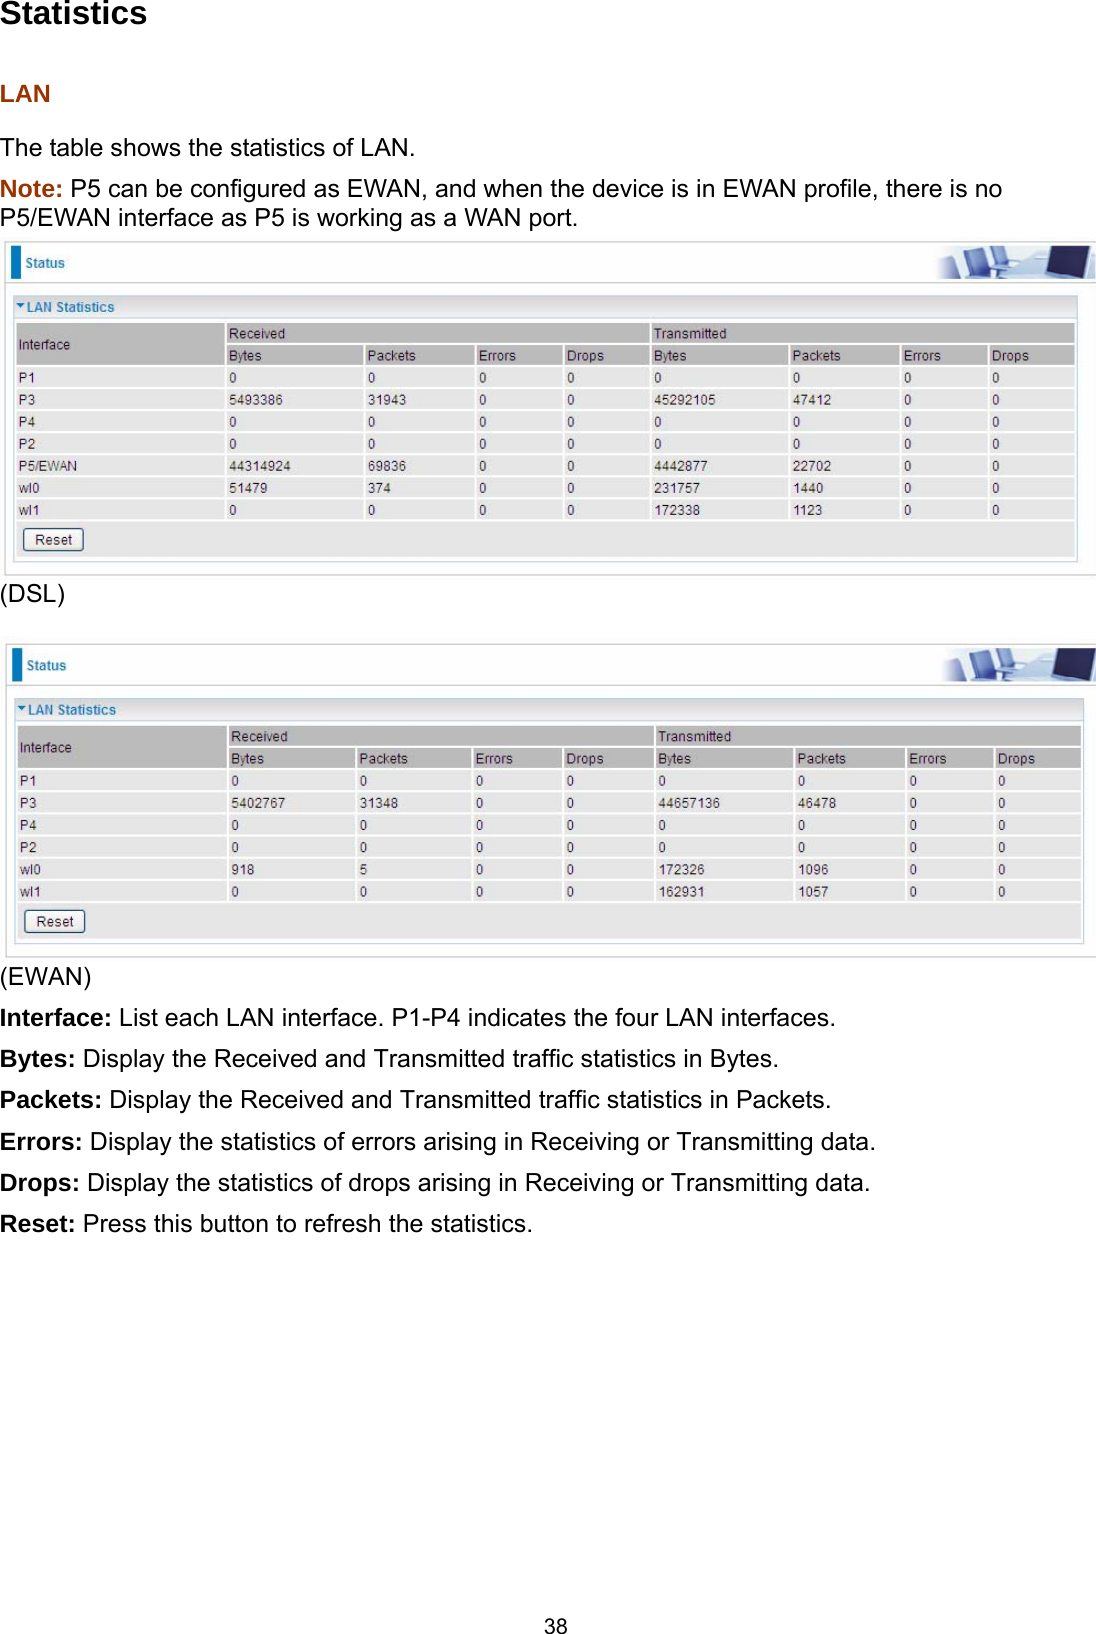  38 Statistics  LAN The table shows the statistics of LAN.  Note: P5 can be configured as EWAN, and when the device is in EWAN profile, there is no P5/EWAN interface as P5 is working as a WAN port.  (DSL)   (EWAN) Interface: List each LAN interface. P1-P4 indicates the four LAN interfaces. Bytes: Display the Received and Transmitted traffic statistics in Bytes. Packets: Display the Received and Transmitted traffic statistics in Packets. Errors: Display the statistics of errors arising in Receiving or Transmitting data. Drops: Display the statistics of drops arising in Receiving or Transmitting data.   Reset: Press this button to refresh the statistics.         